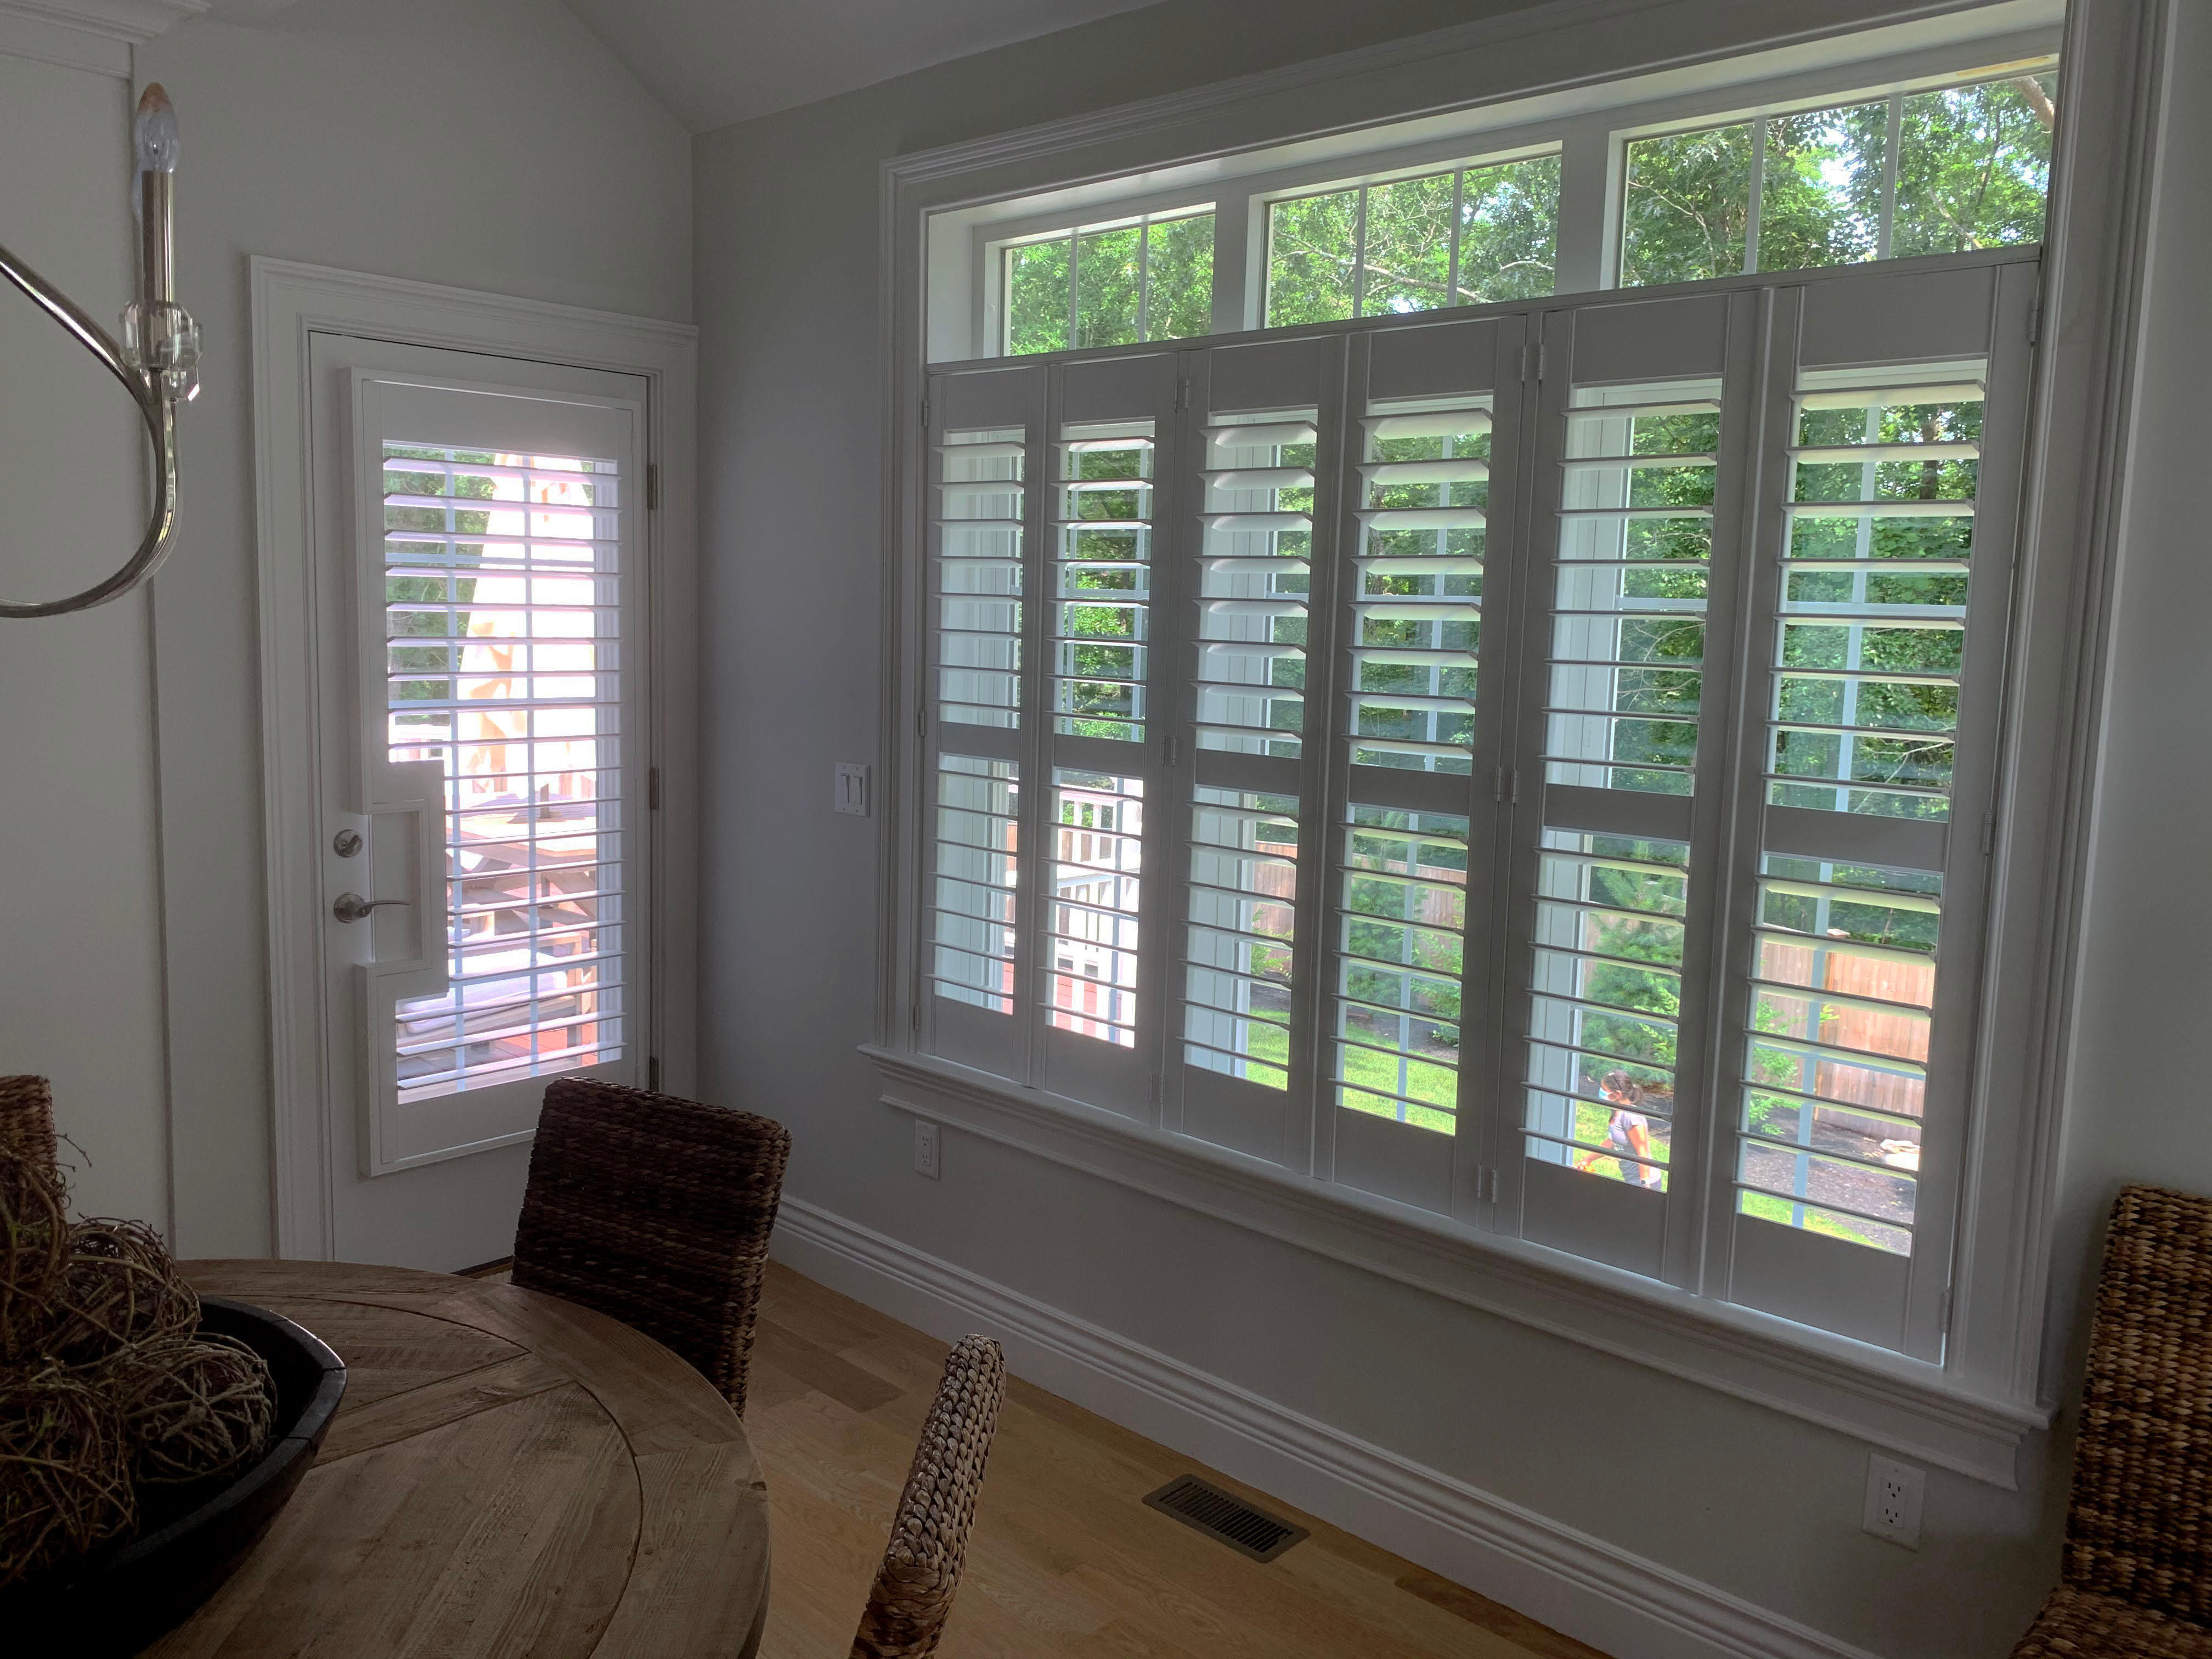 Composite shutters stand up to high humidity areas and effectively resist fading and cracking due to their synthetic materials.